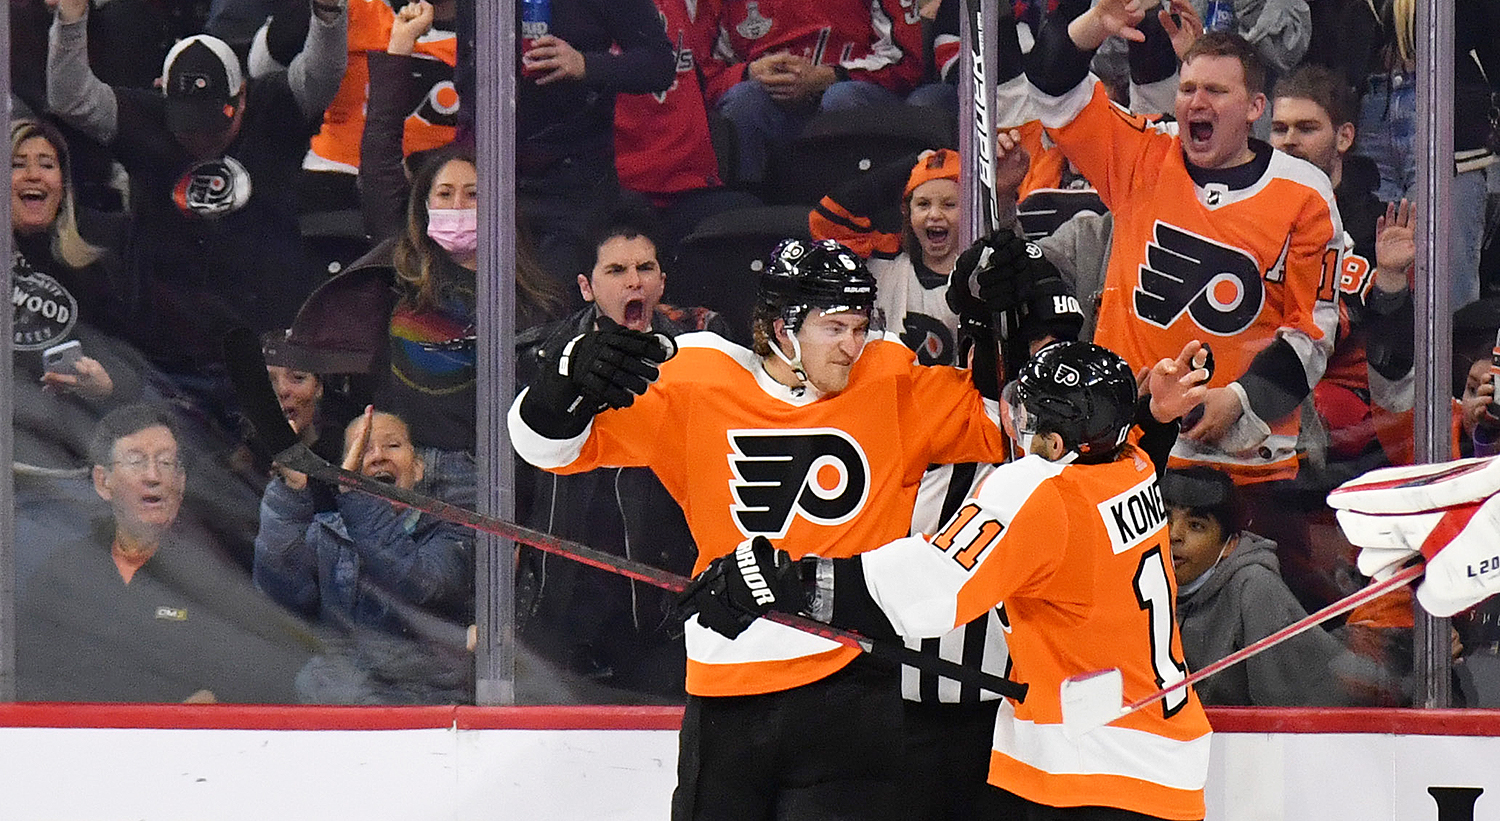 Flyers-Bruins: Preseason Game 1 Preview - sportstalkphilly - News, rumors,  game coverage of the Philadelphia Eagles, Philadelphia Phillies, Philadelphia  Flyers, and Philadelphia 76ers